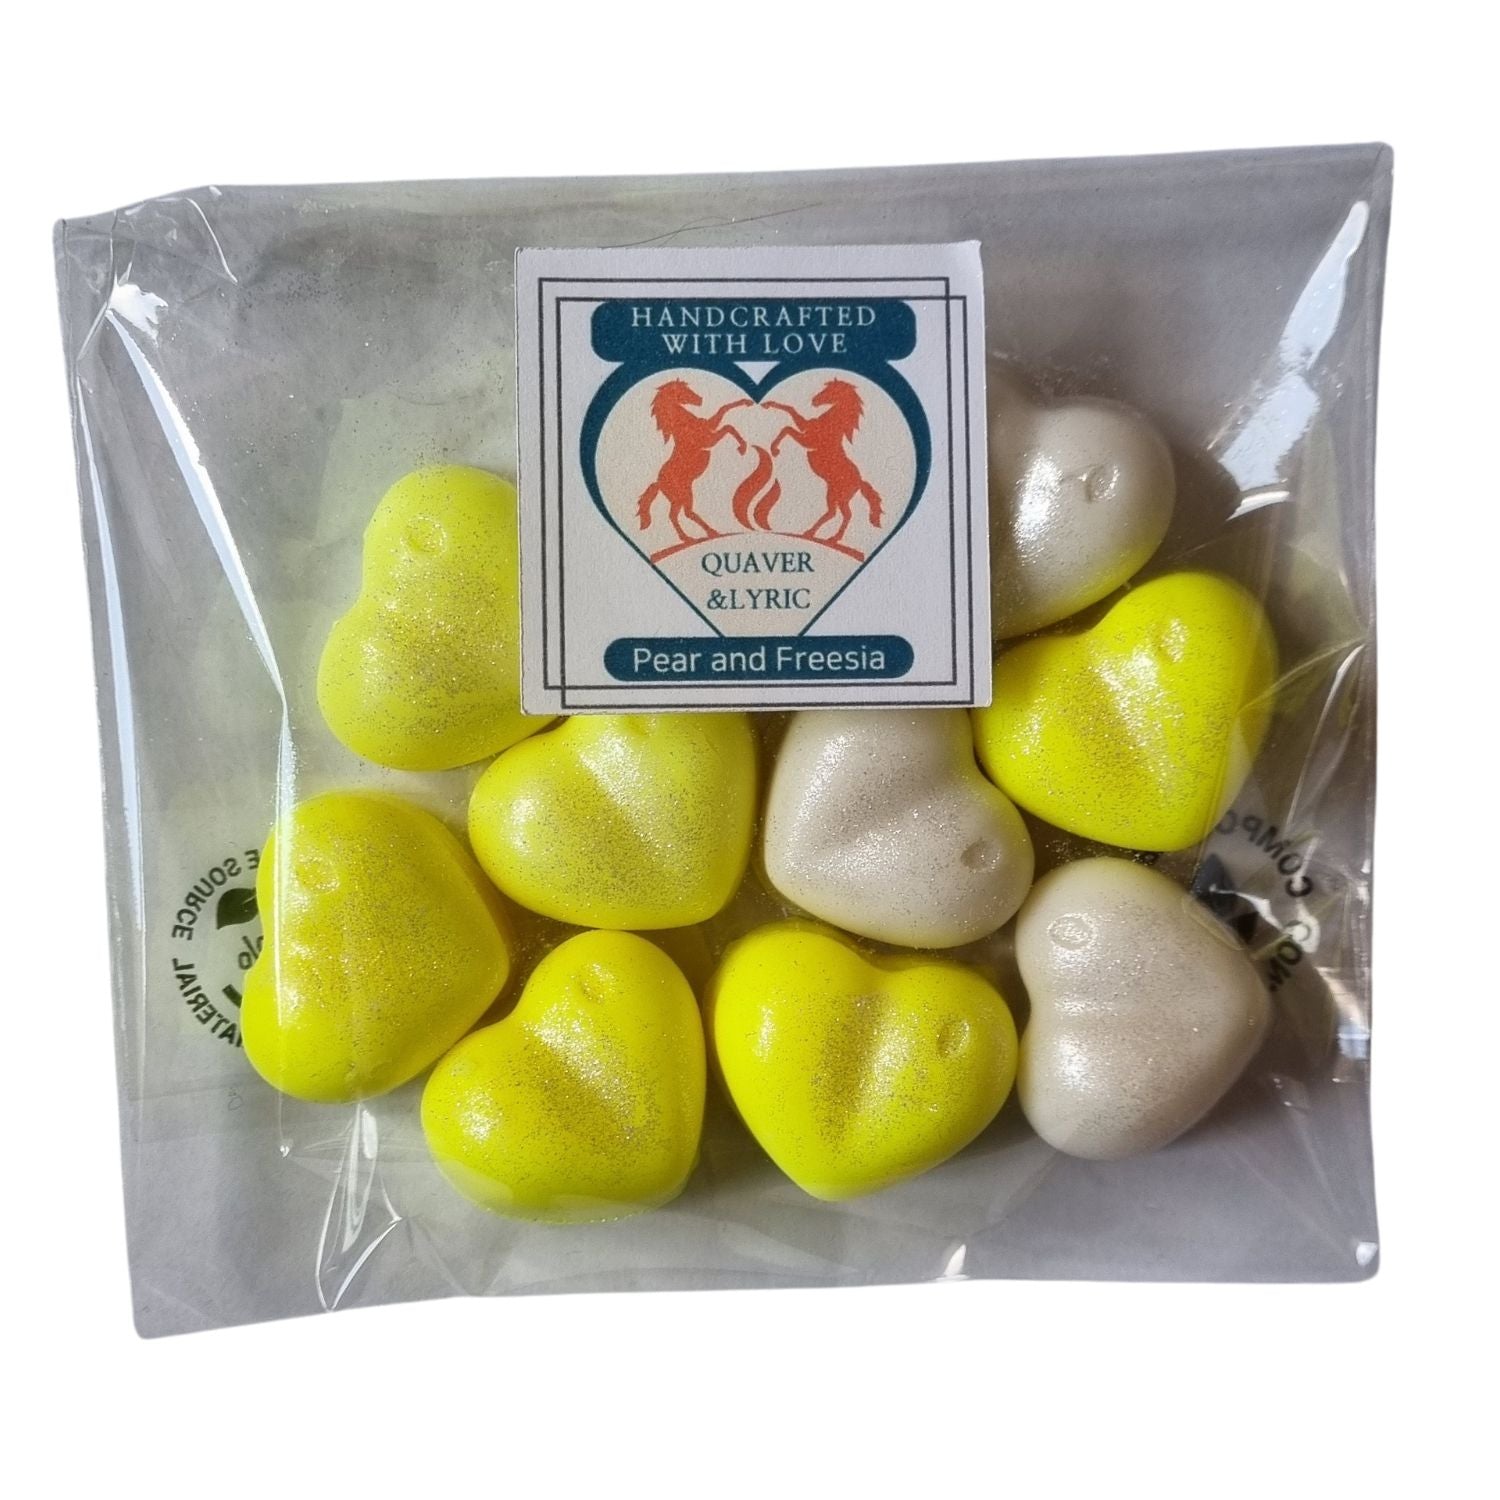 ten white and bright yellow heart shaped soy wax melts in a packet with Quaver and Lyric branding